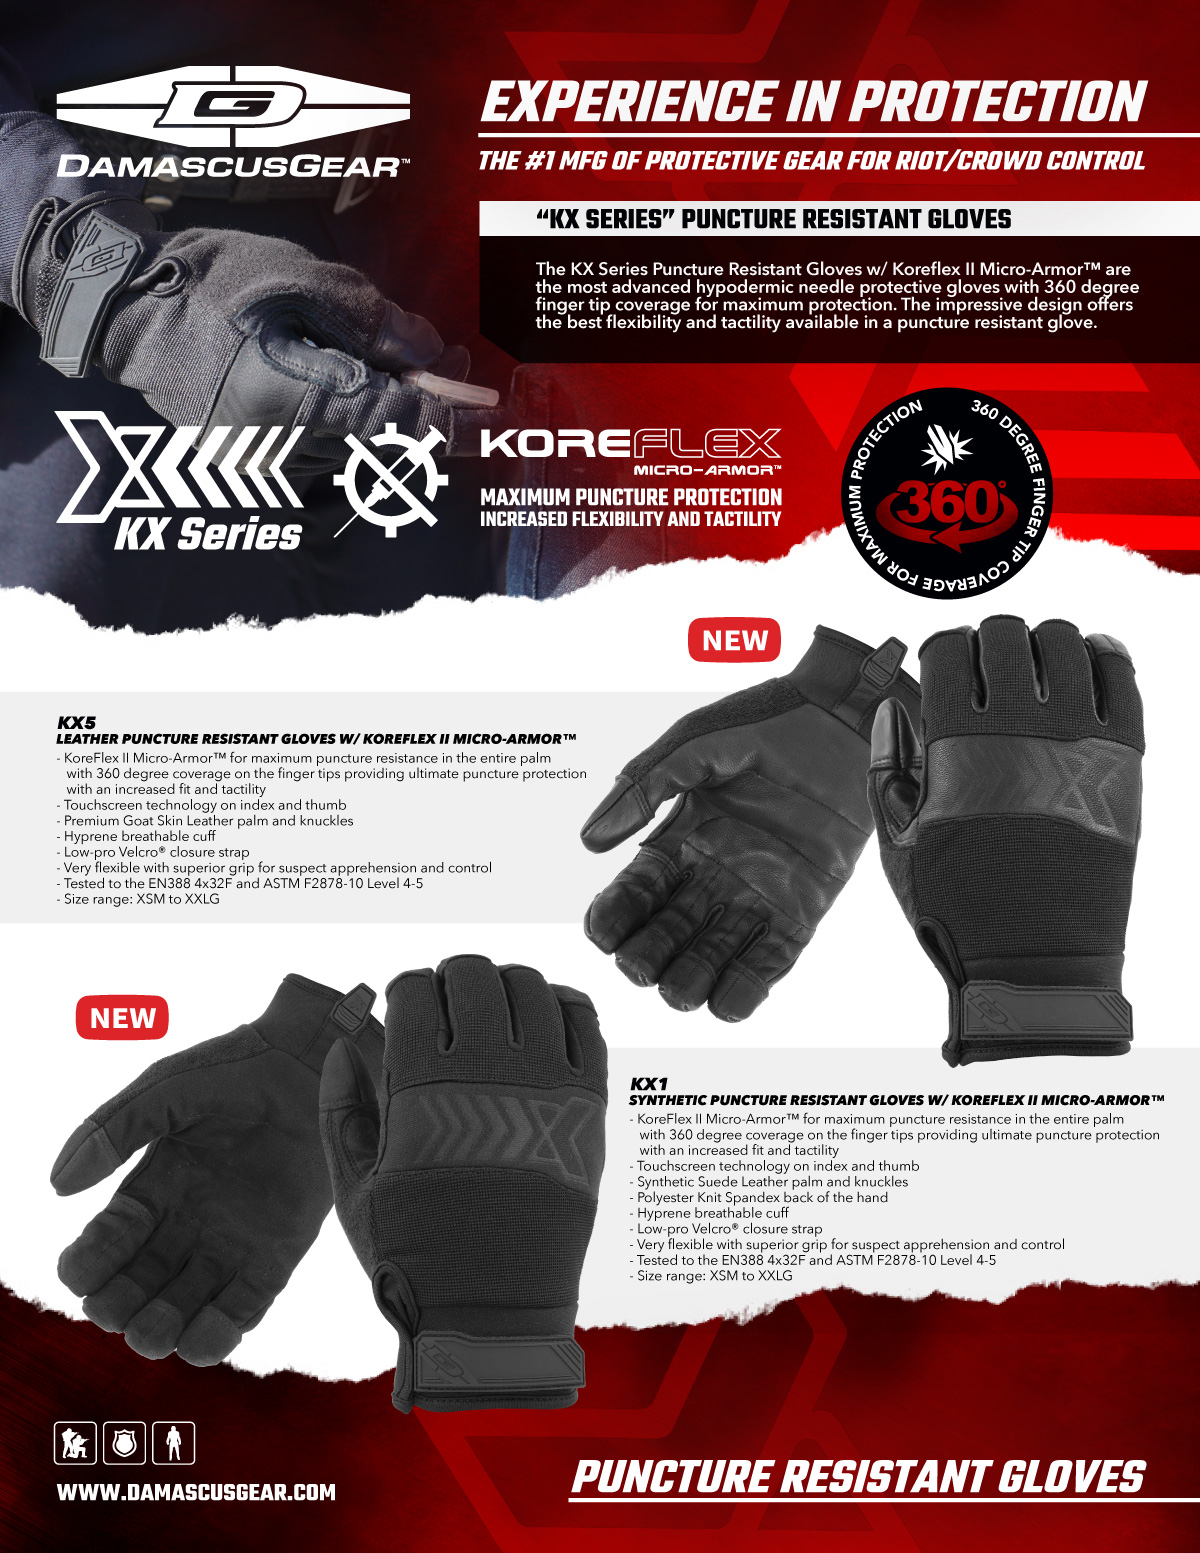 Leather Puncture Resistant Gloves w/ Koreflex II Micro-Armor